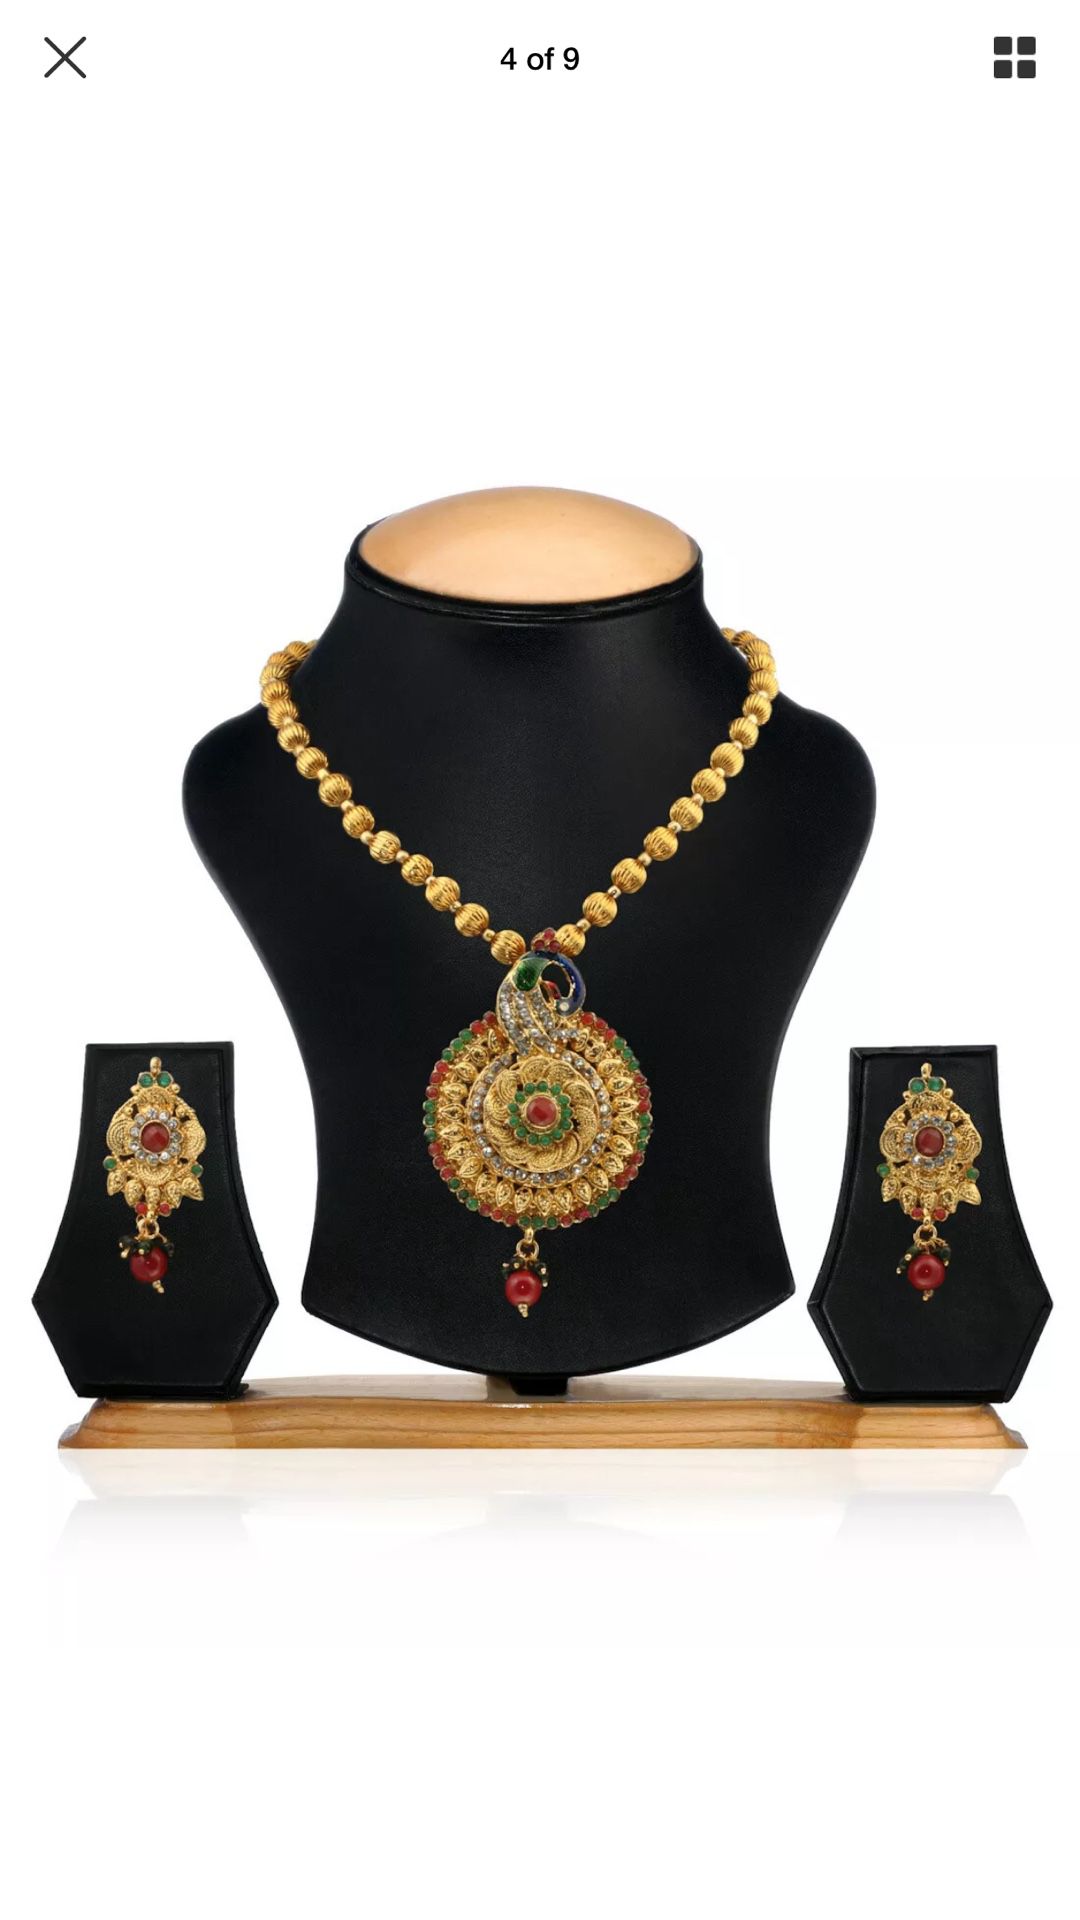 Gold plated jewelry accessory earrings necklace pedant set